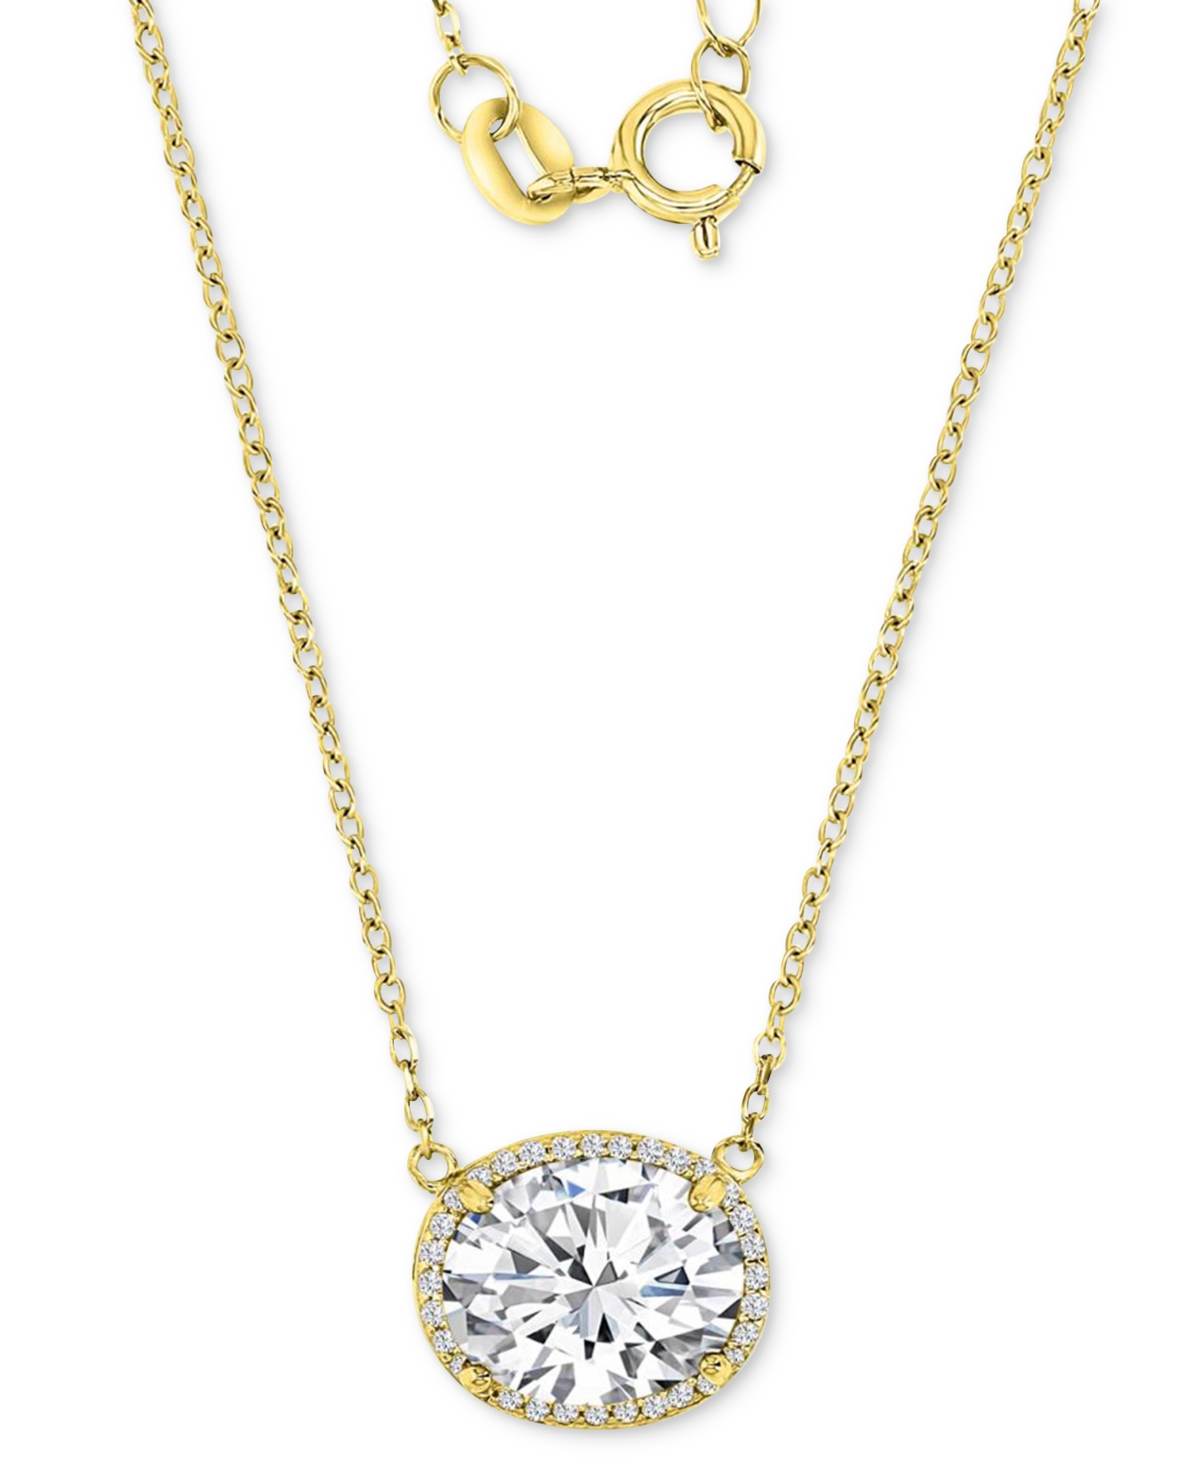 Cubic Zirconia Halo Pendant Necklace in 14k Gold-Plated Sterling Silver, 16" + 2" extender - Gold